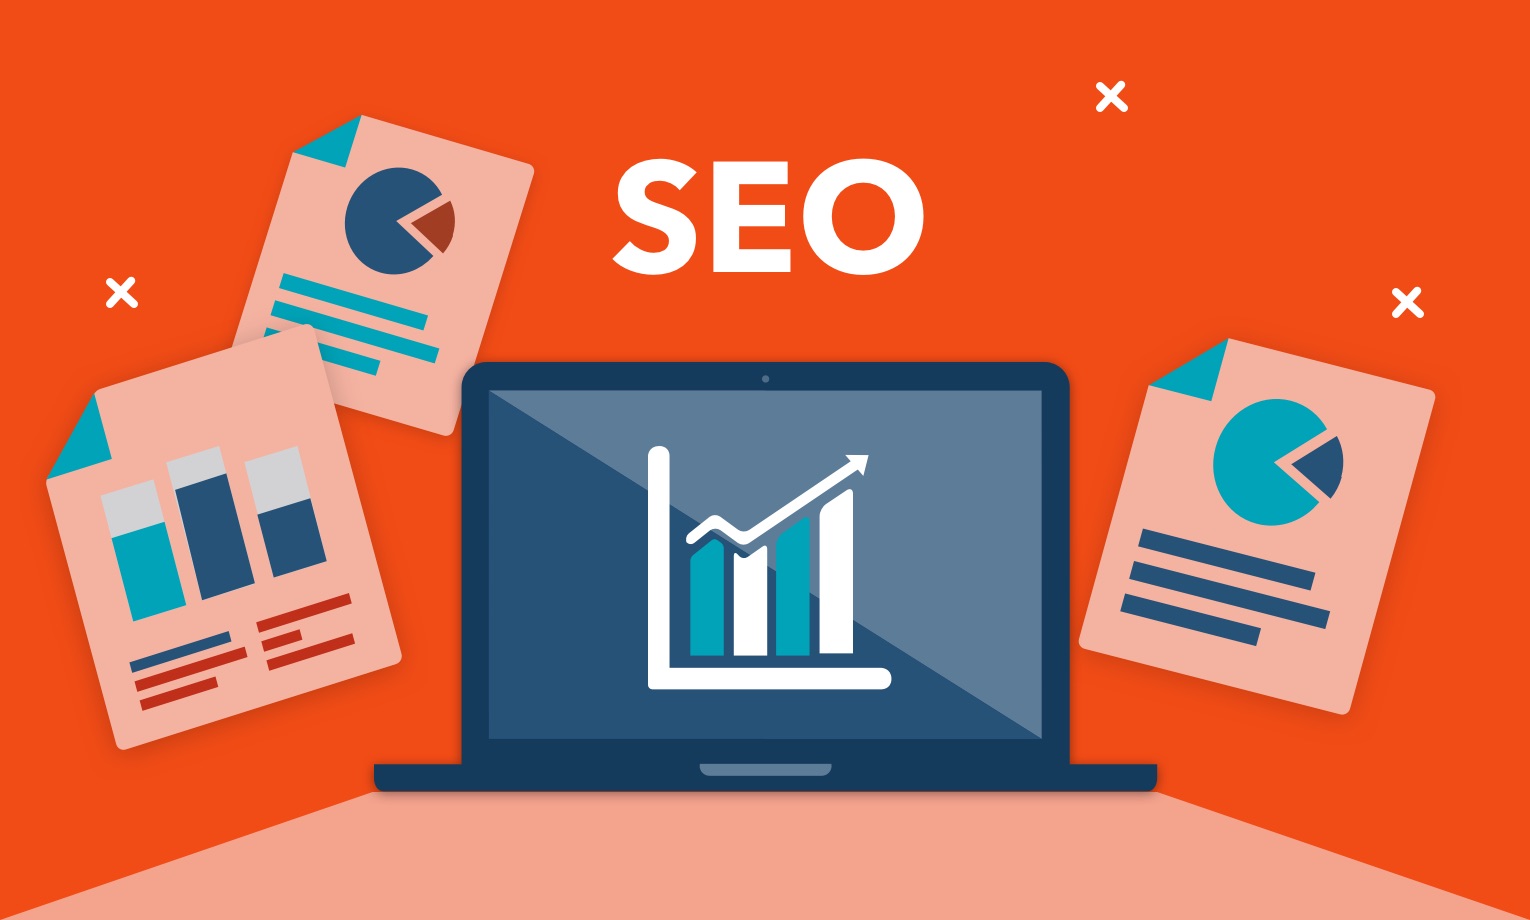 Important SEO Insights for Better Ranking in Search Results